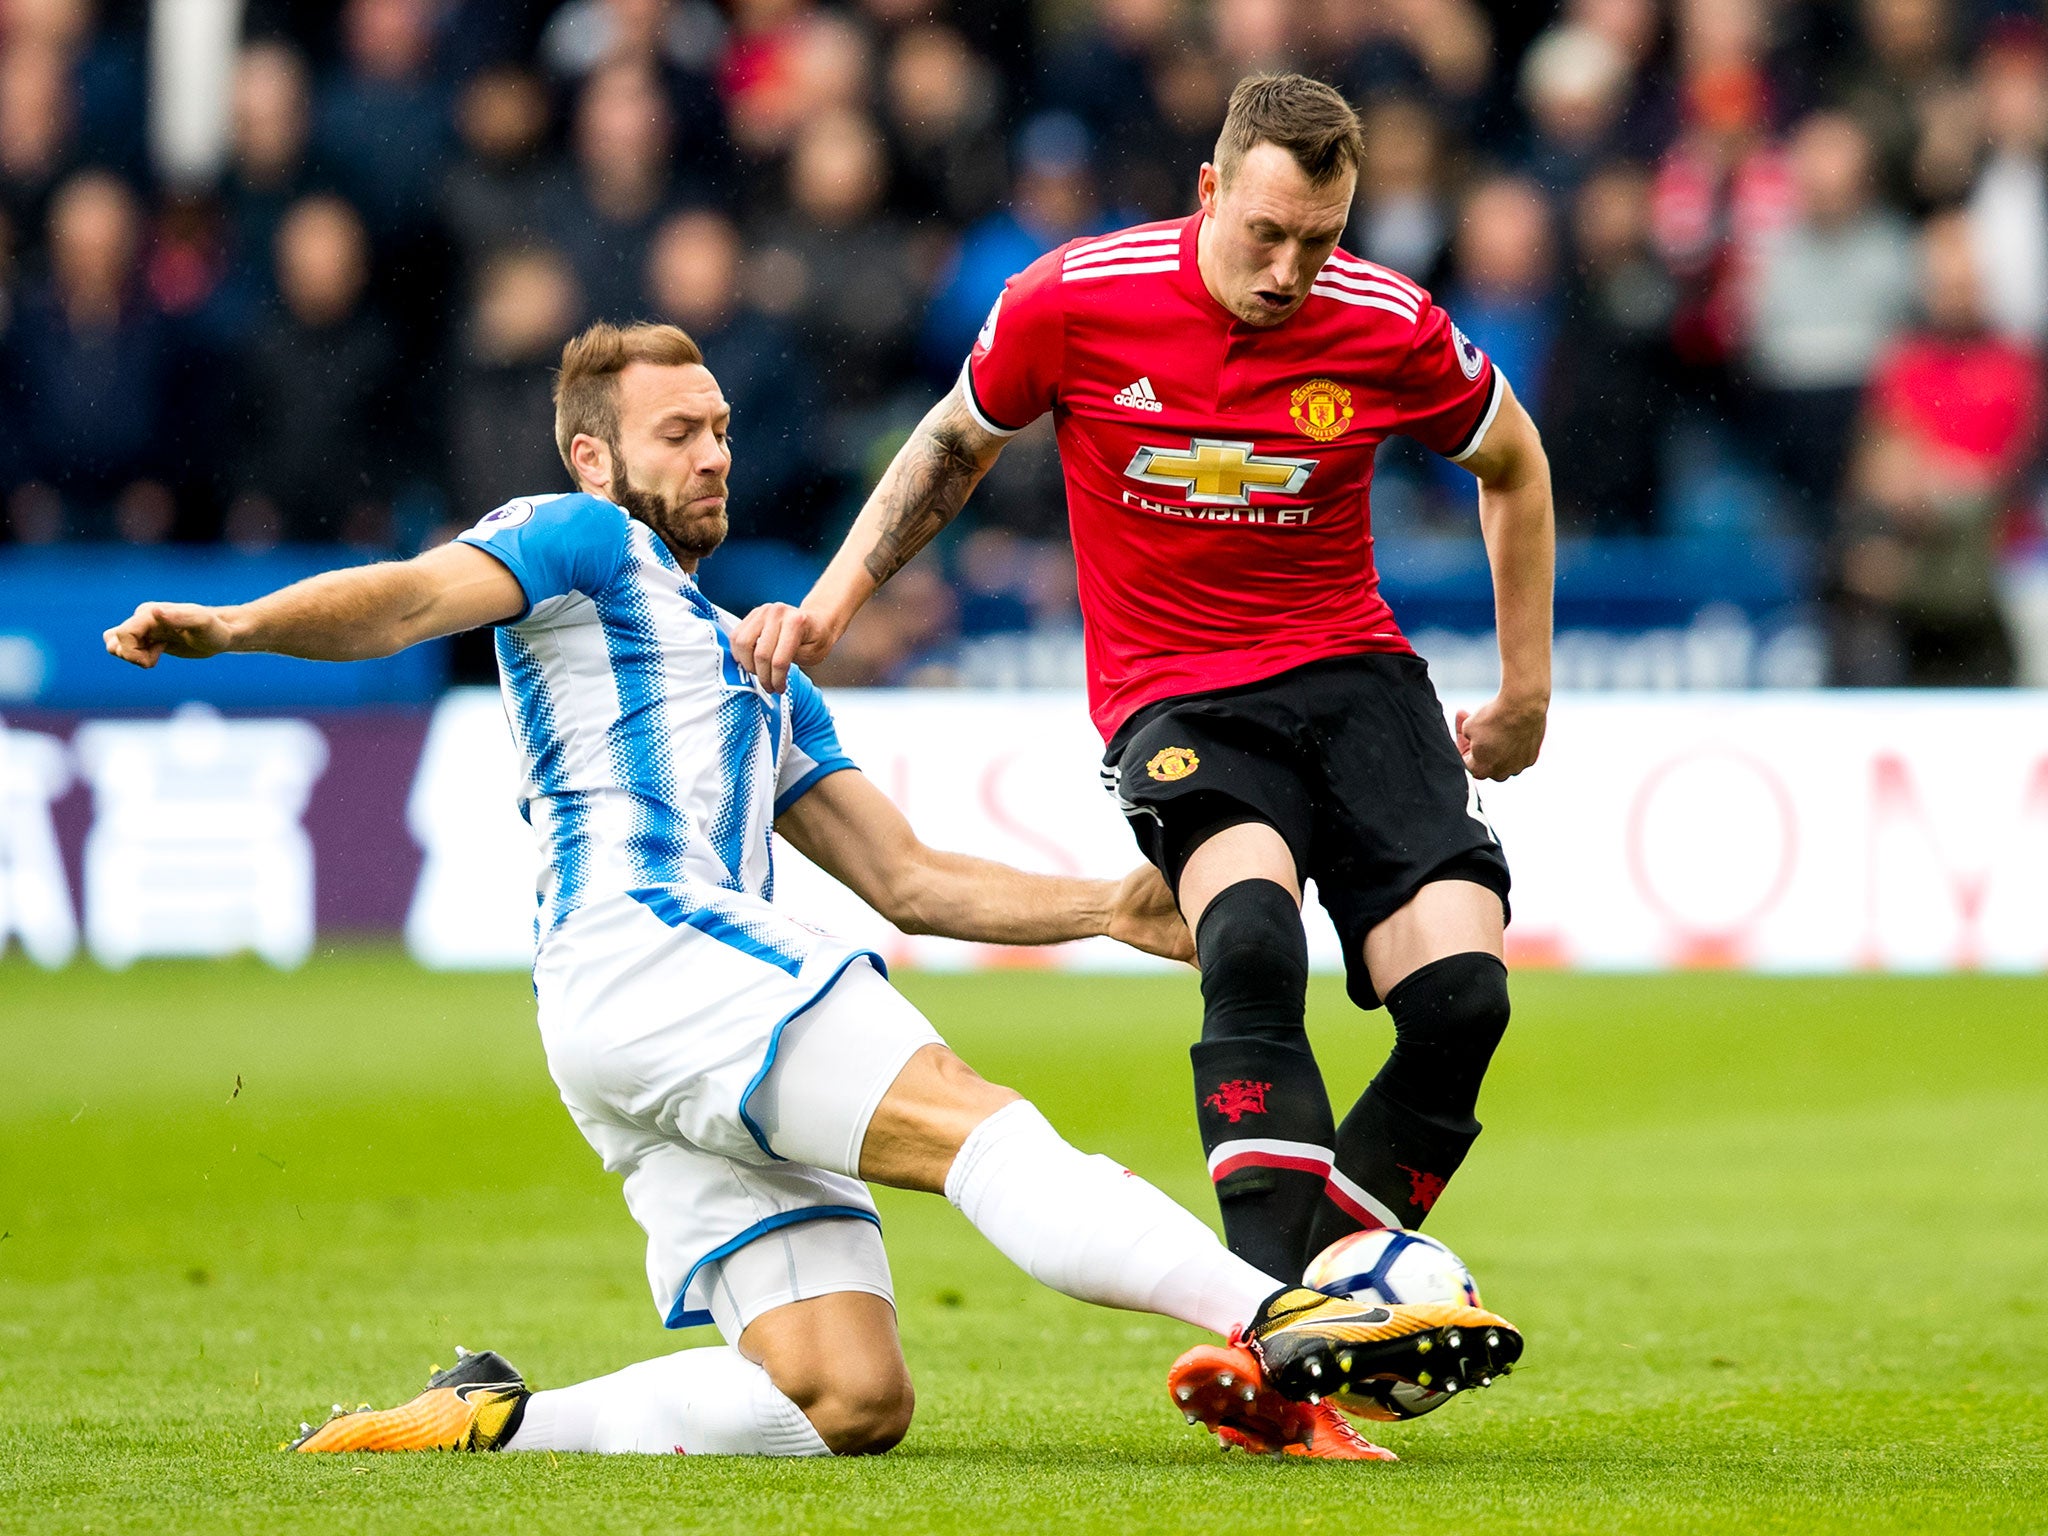 Huddersfield won 2-1 in their last encounter with Manchester United